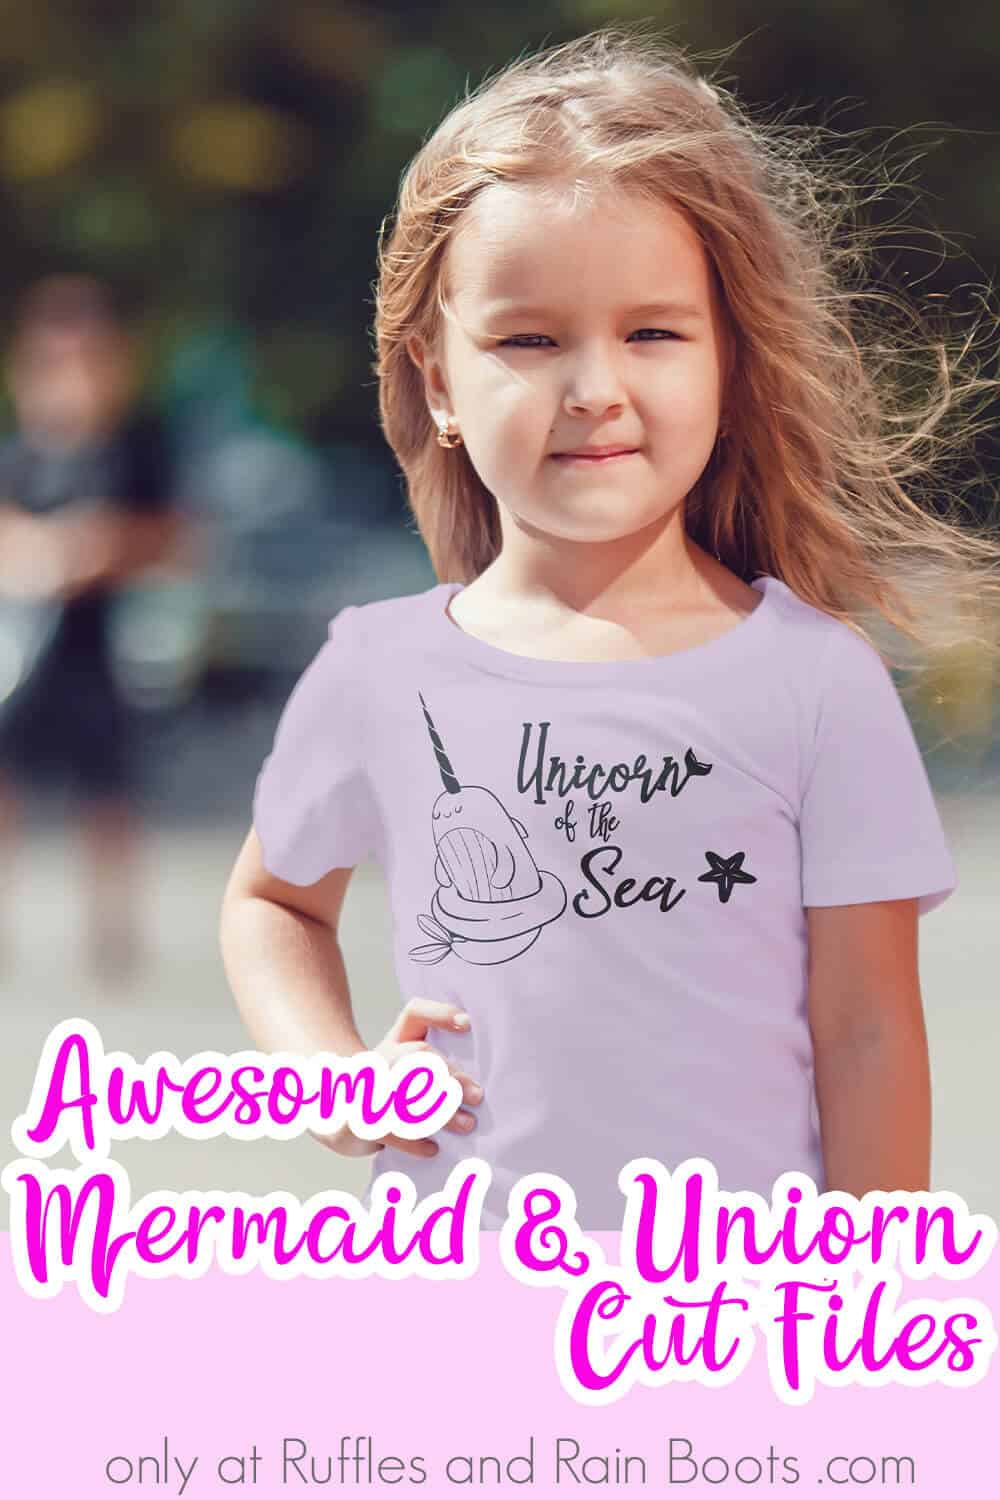 unicorn of the sea nharwal svg on a shirt worn by a little girl in front of a blurred, crowded street with text which reads awesome mermaid & unicorn cut files